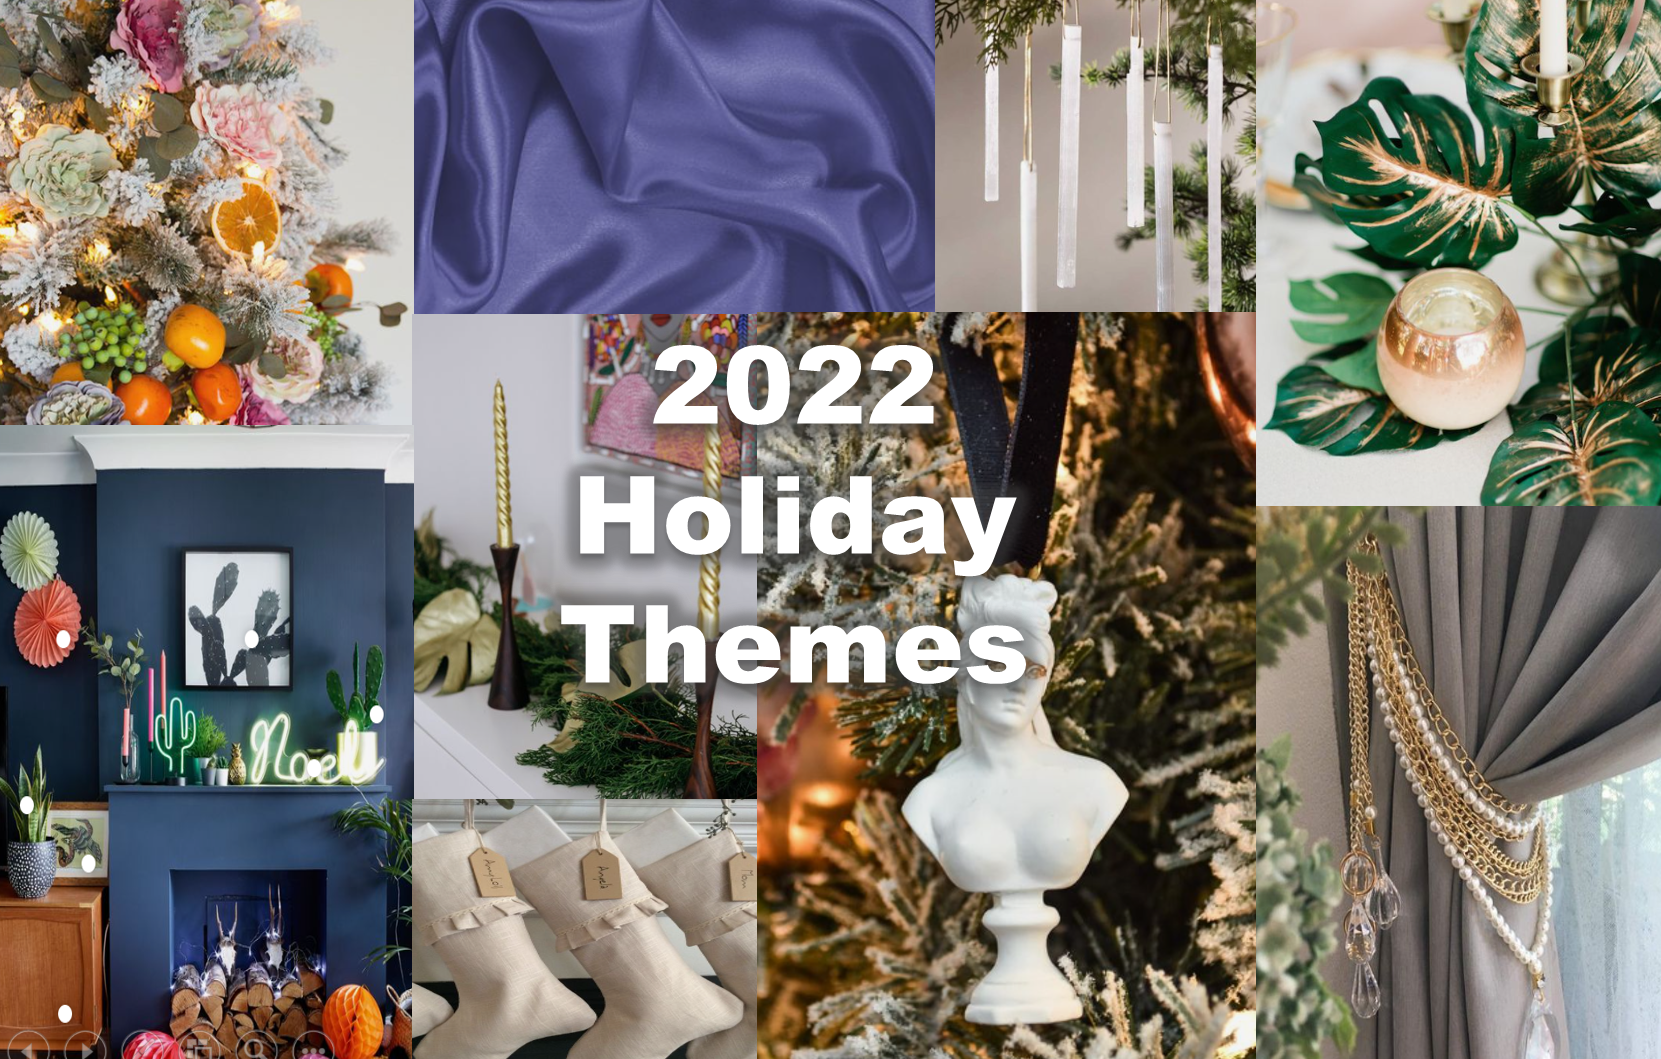 Holiday Themes to Make Your Holiday Party Unforgettable